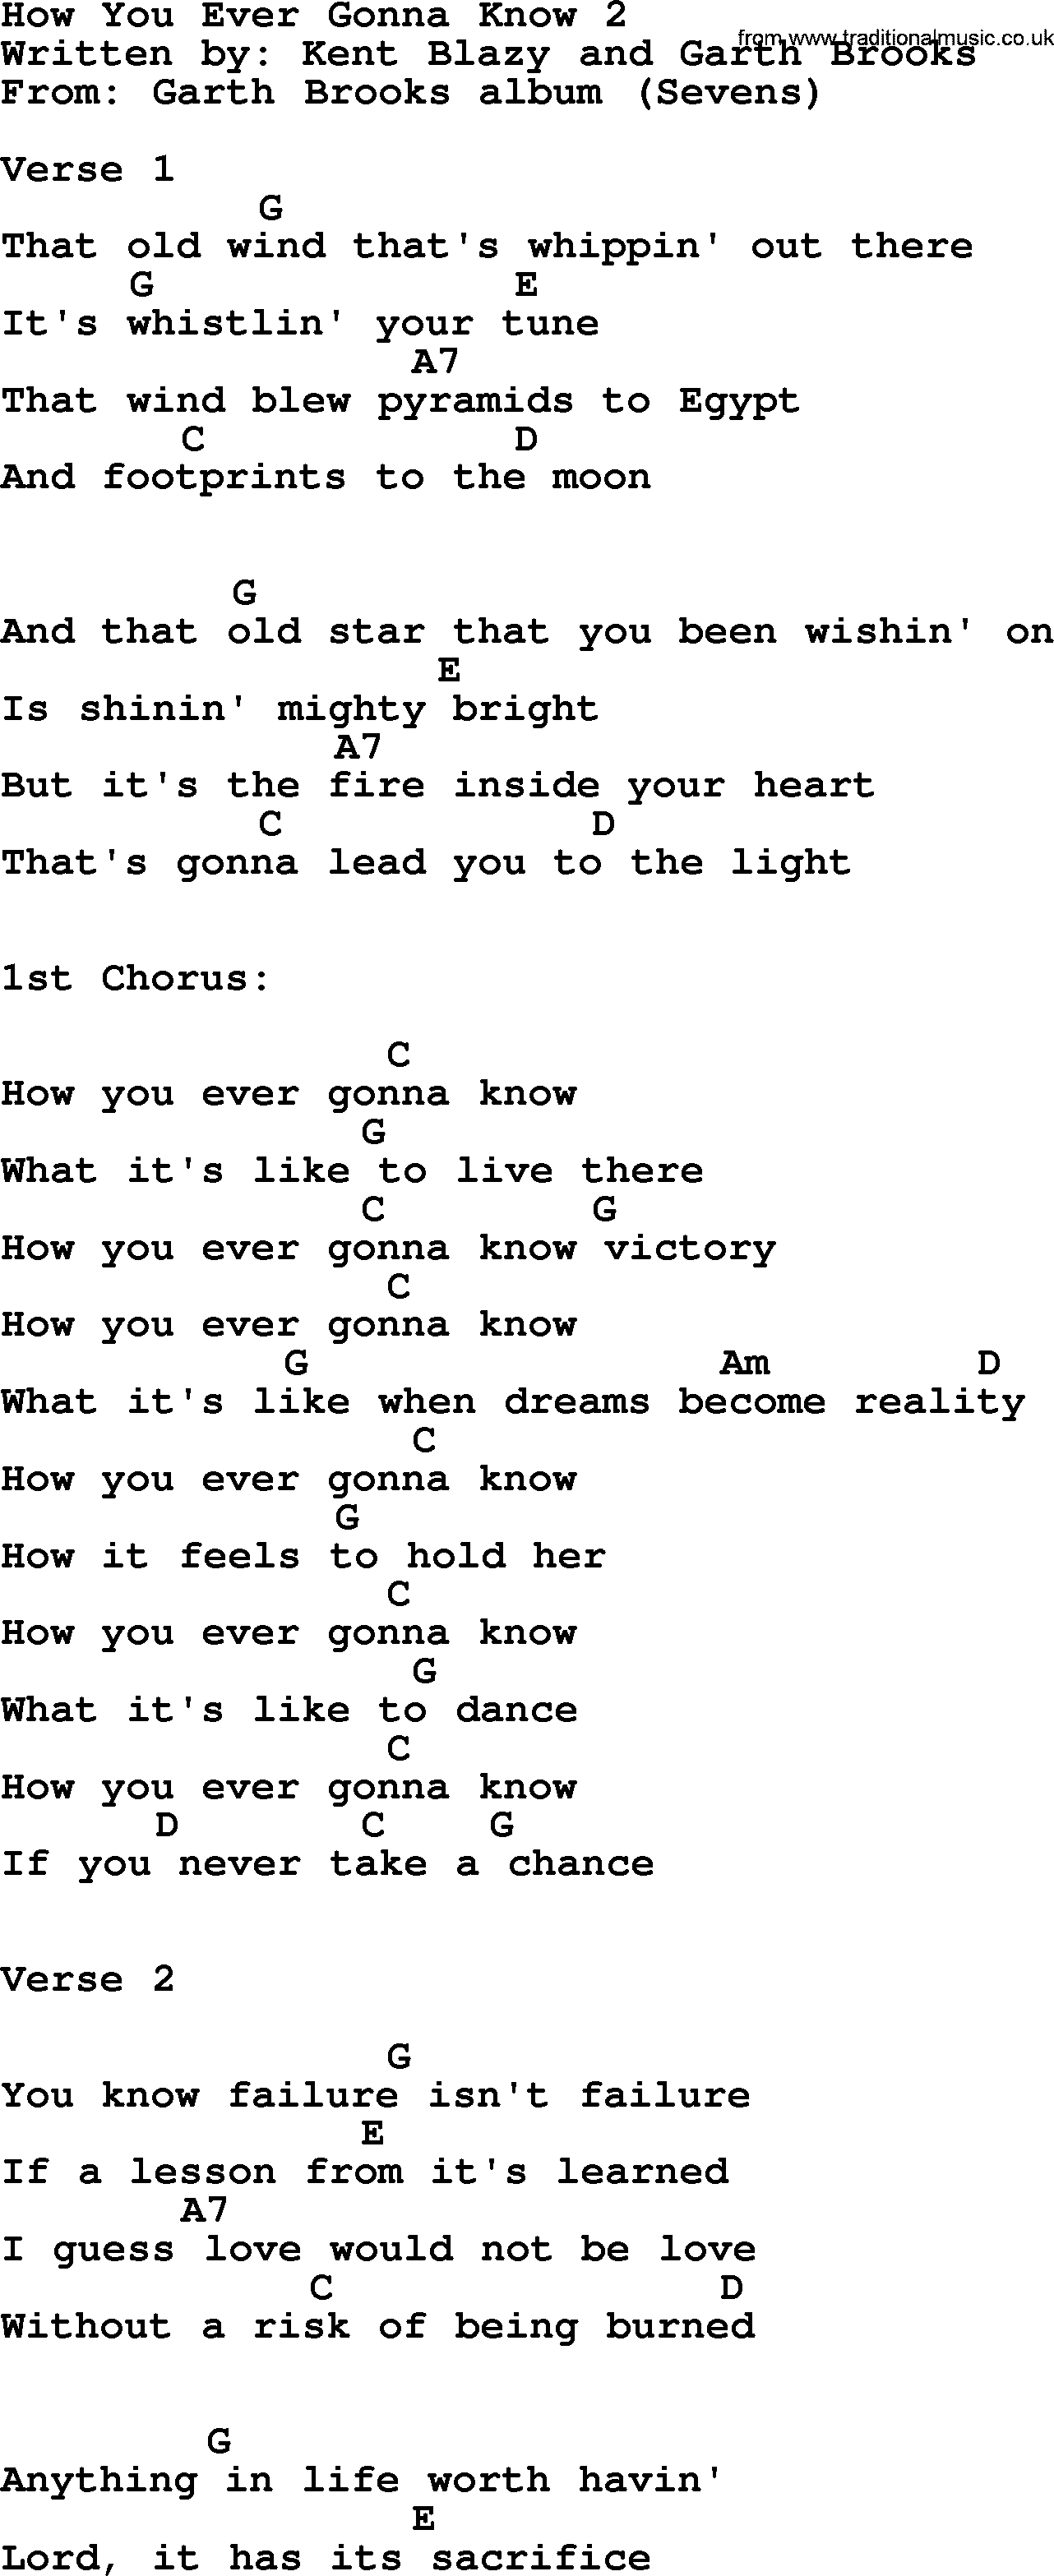 Garth Brooks song: How You Ever Gonna Know 2, lyrics and chords